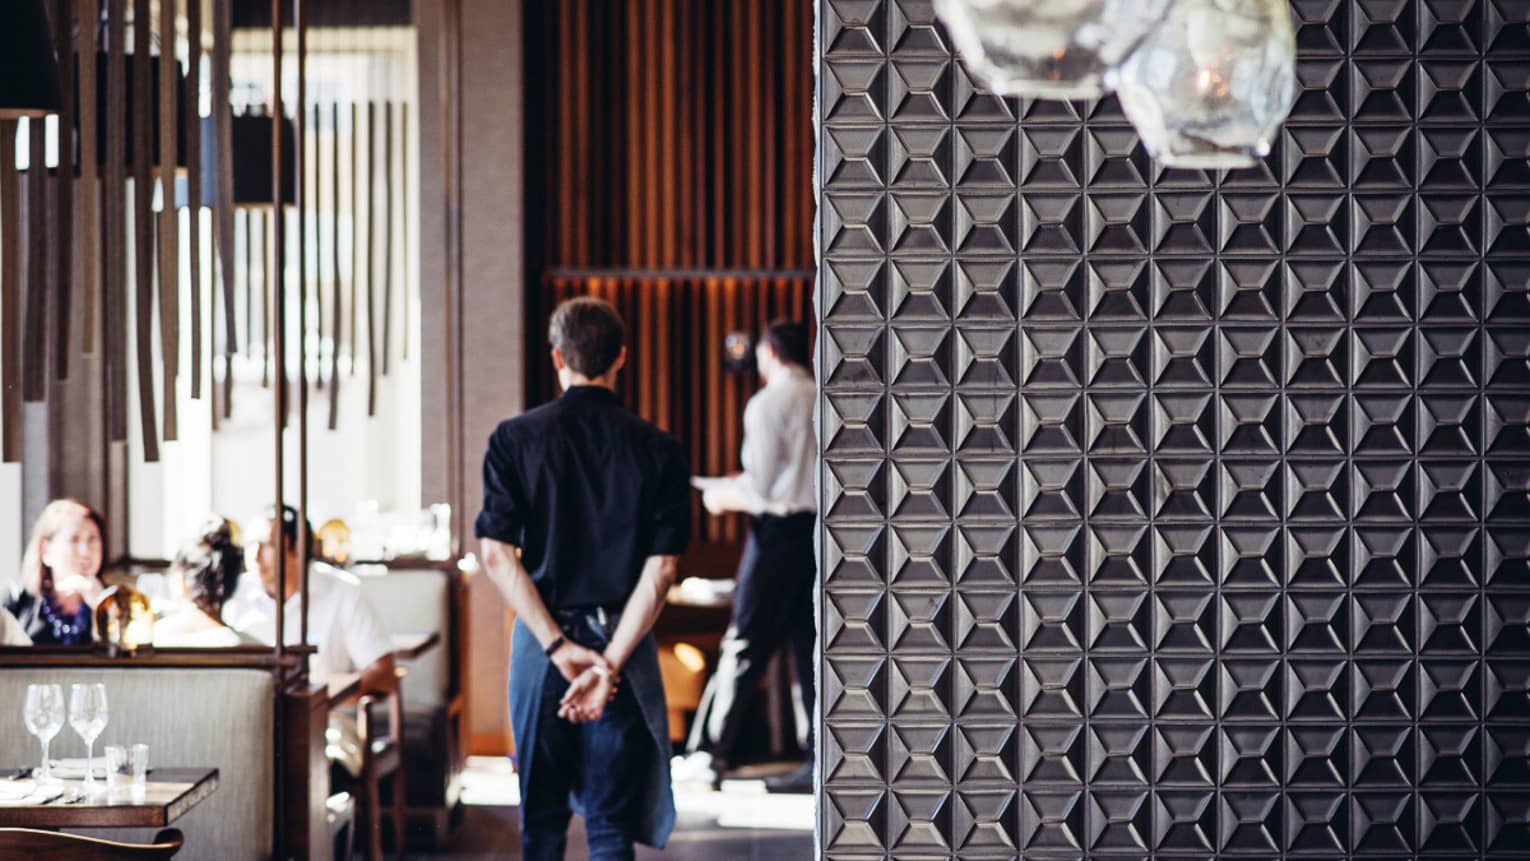 Server walks with hands behind back past dining tables, beyond decorative metal wall